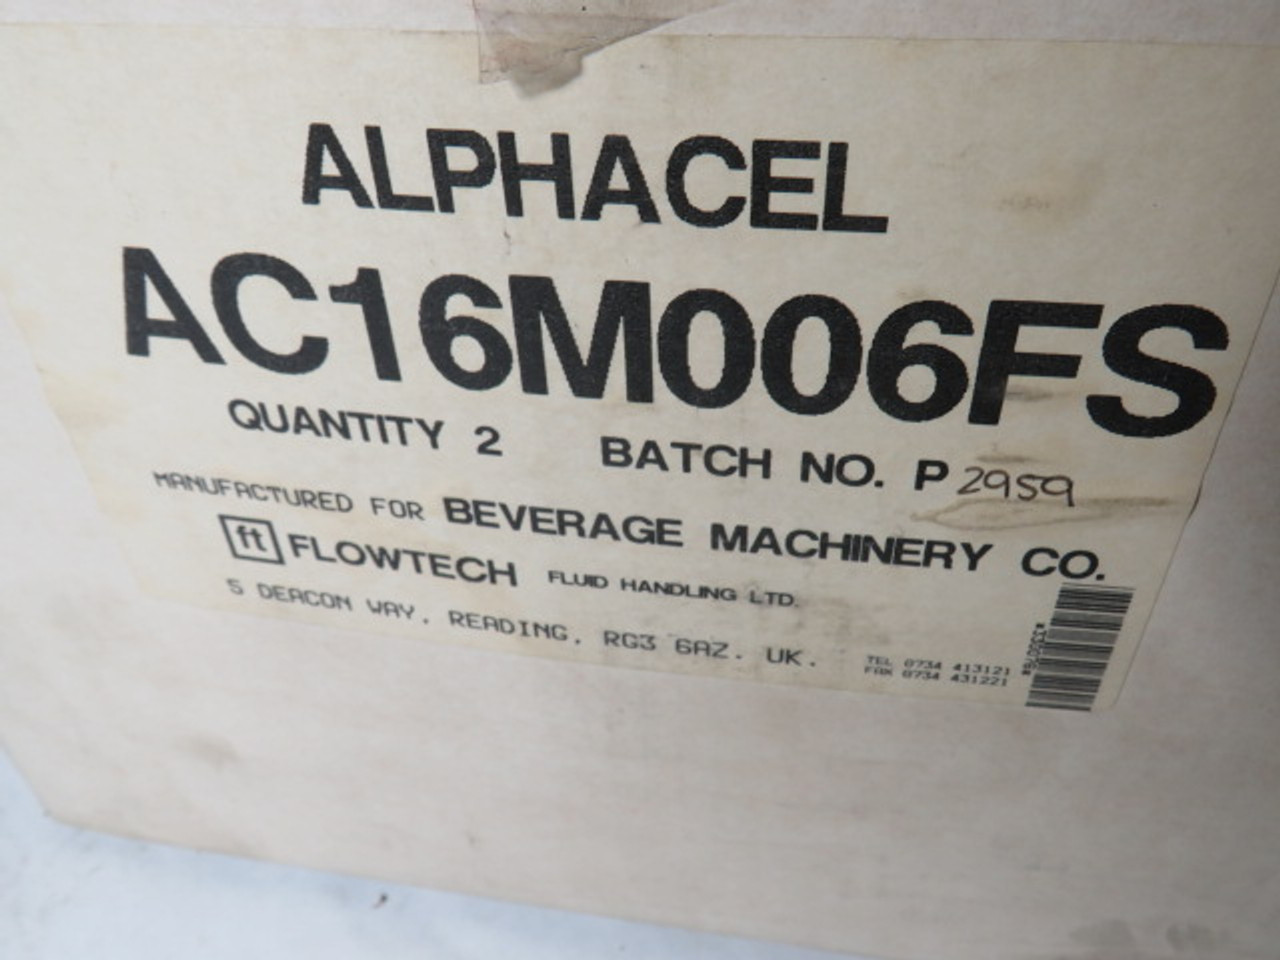 Alphacel AC16M006FS Cylindrical Filter Box of 2 ! NEW !